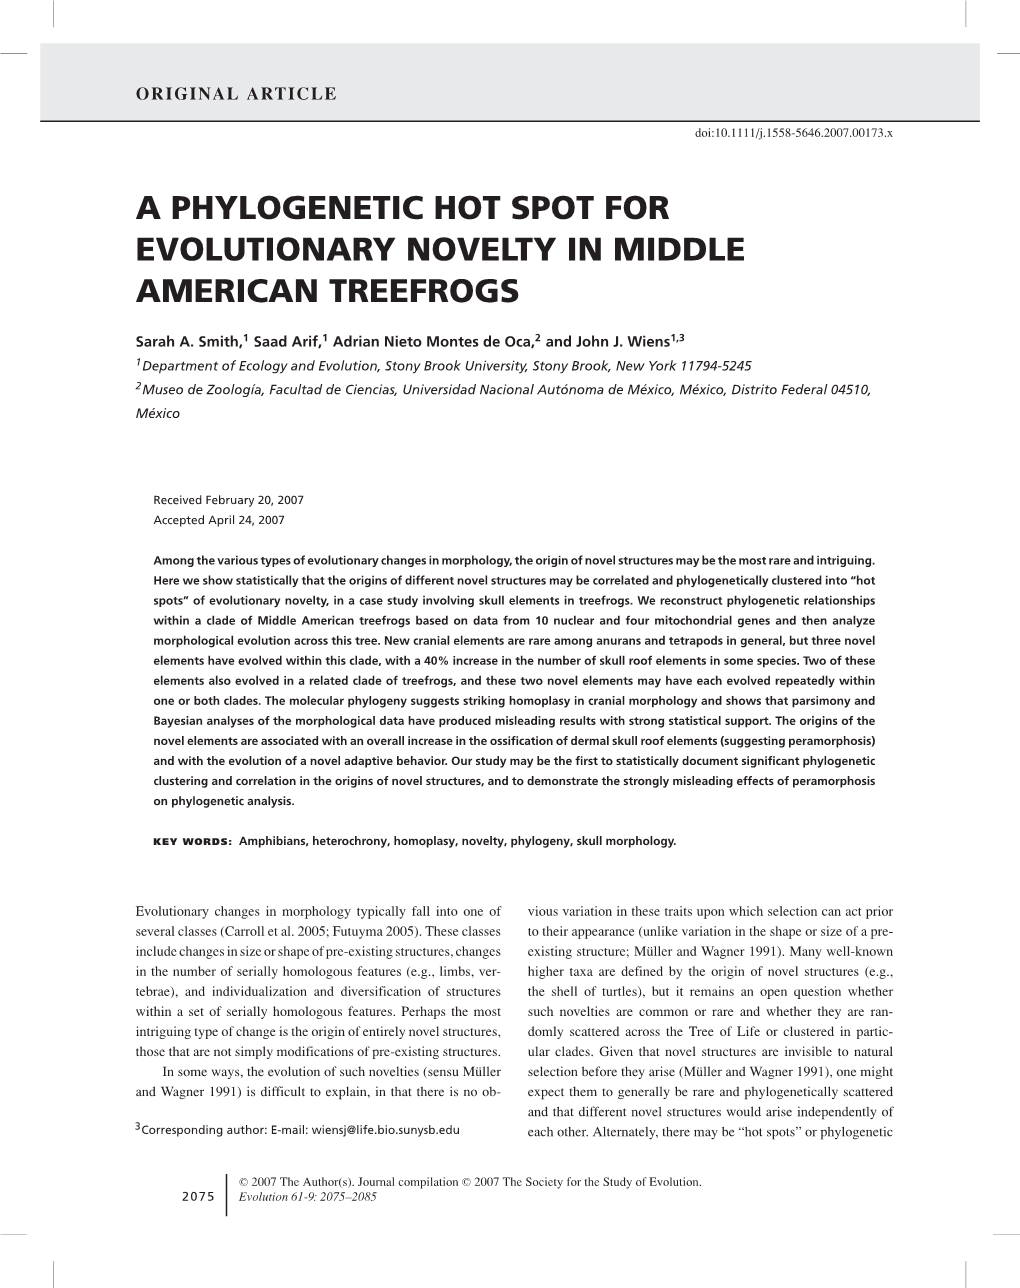 A Phylogenetic Hot Spot for Evolutionary Novelty in Middle American Treefrogs